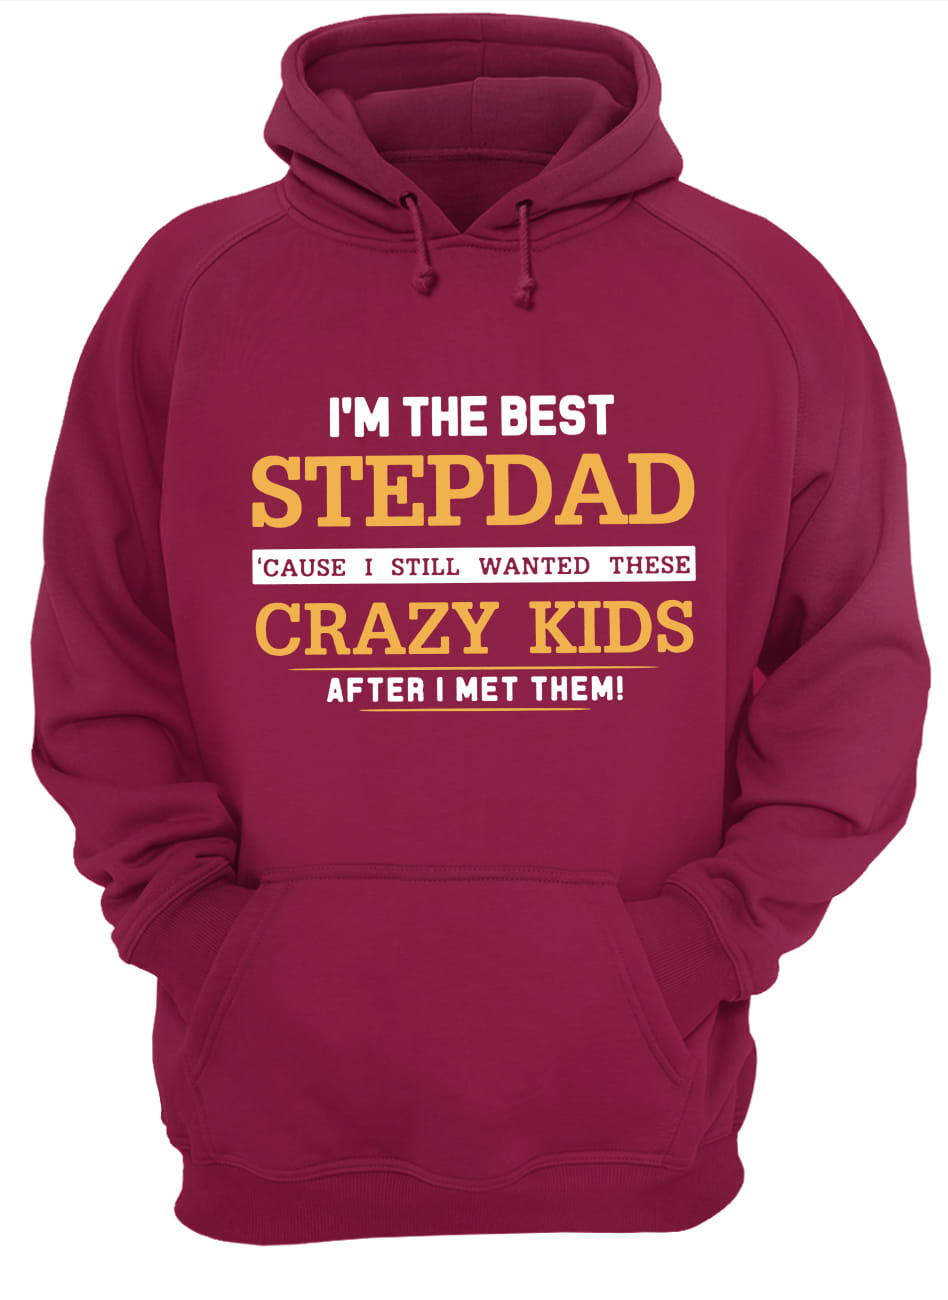 I'm the best stepdad cause I still wanted these crazy kids after I met them hoodie